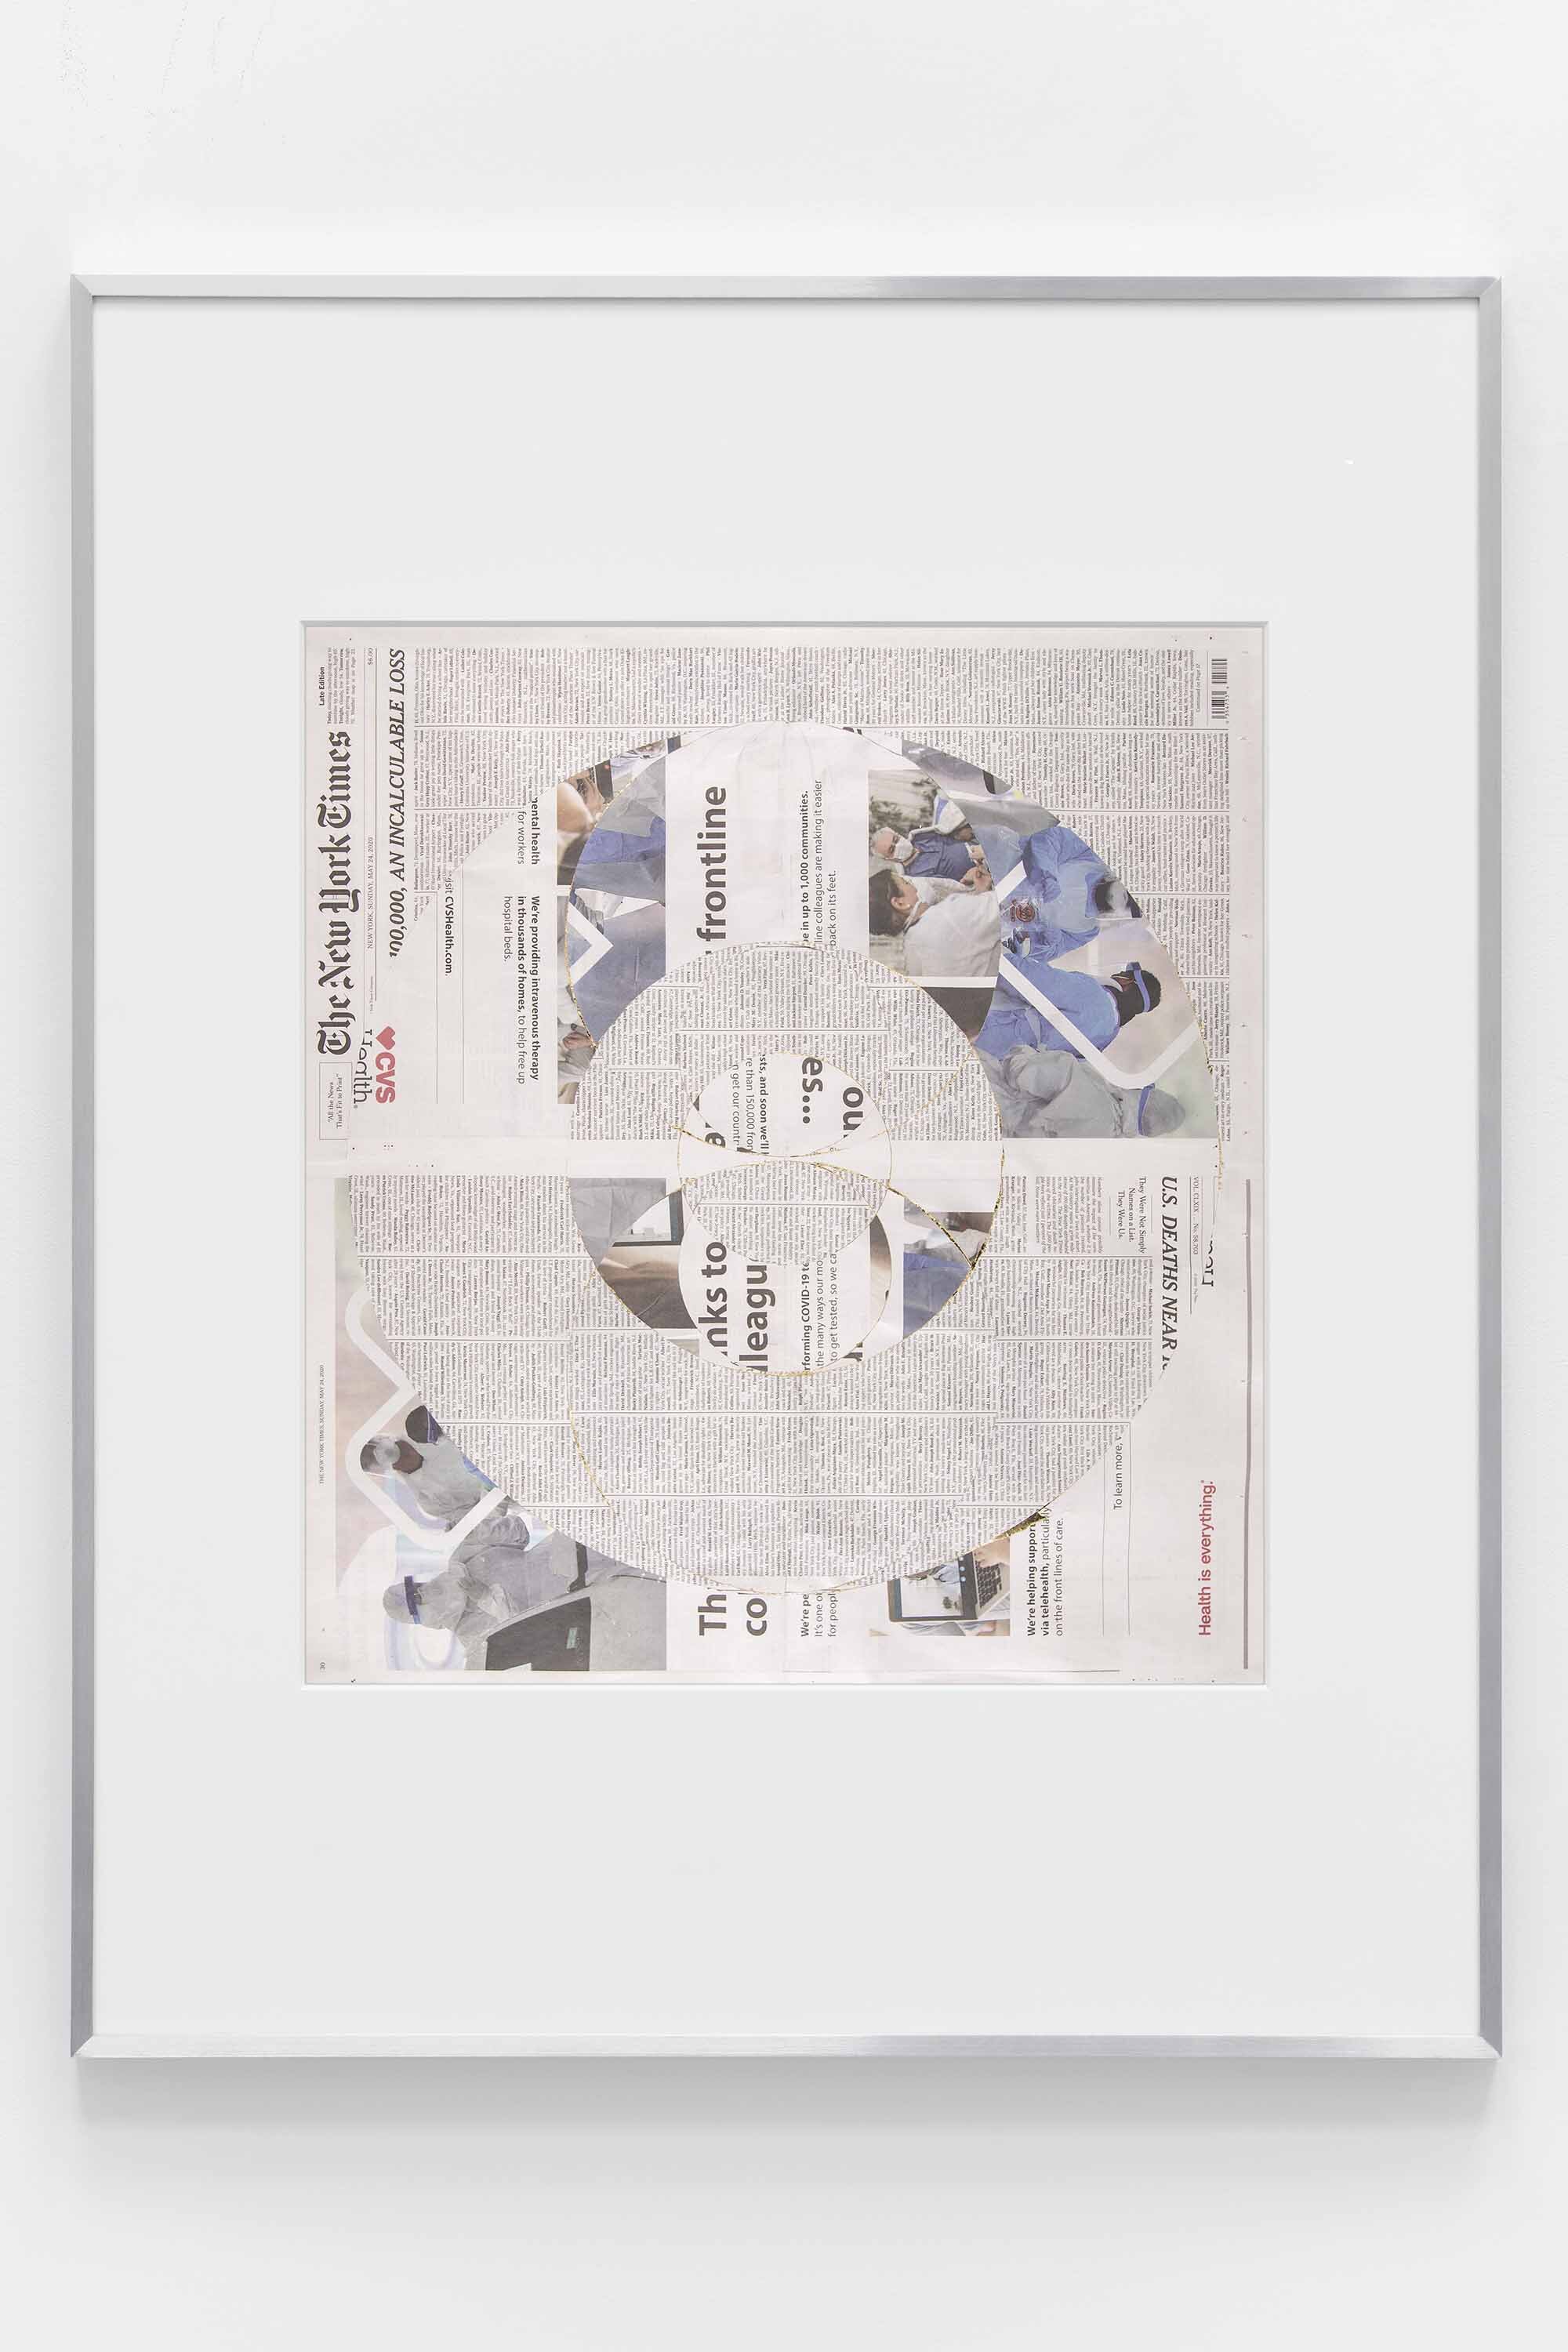   Blind Collage (Seven 180º Rotations, The New York Times: New York City, New York, Sunday, May 24, 2020)    2021   Newspaper, tape, and 22 karat gold leaf  39 1/8 x 31 1/4 inches  Exhibition:   Foreign Correspondence, 2021  